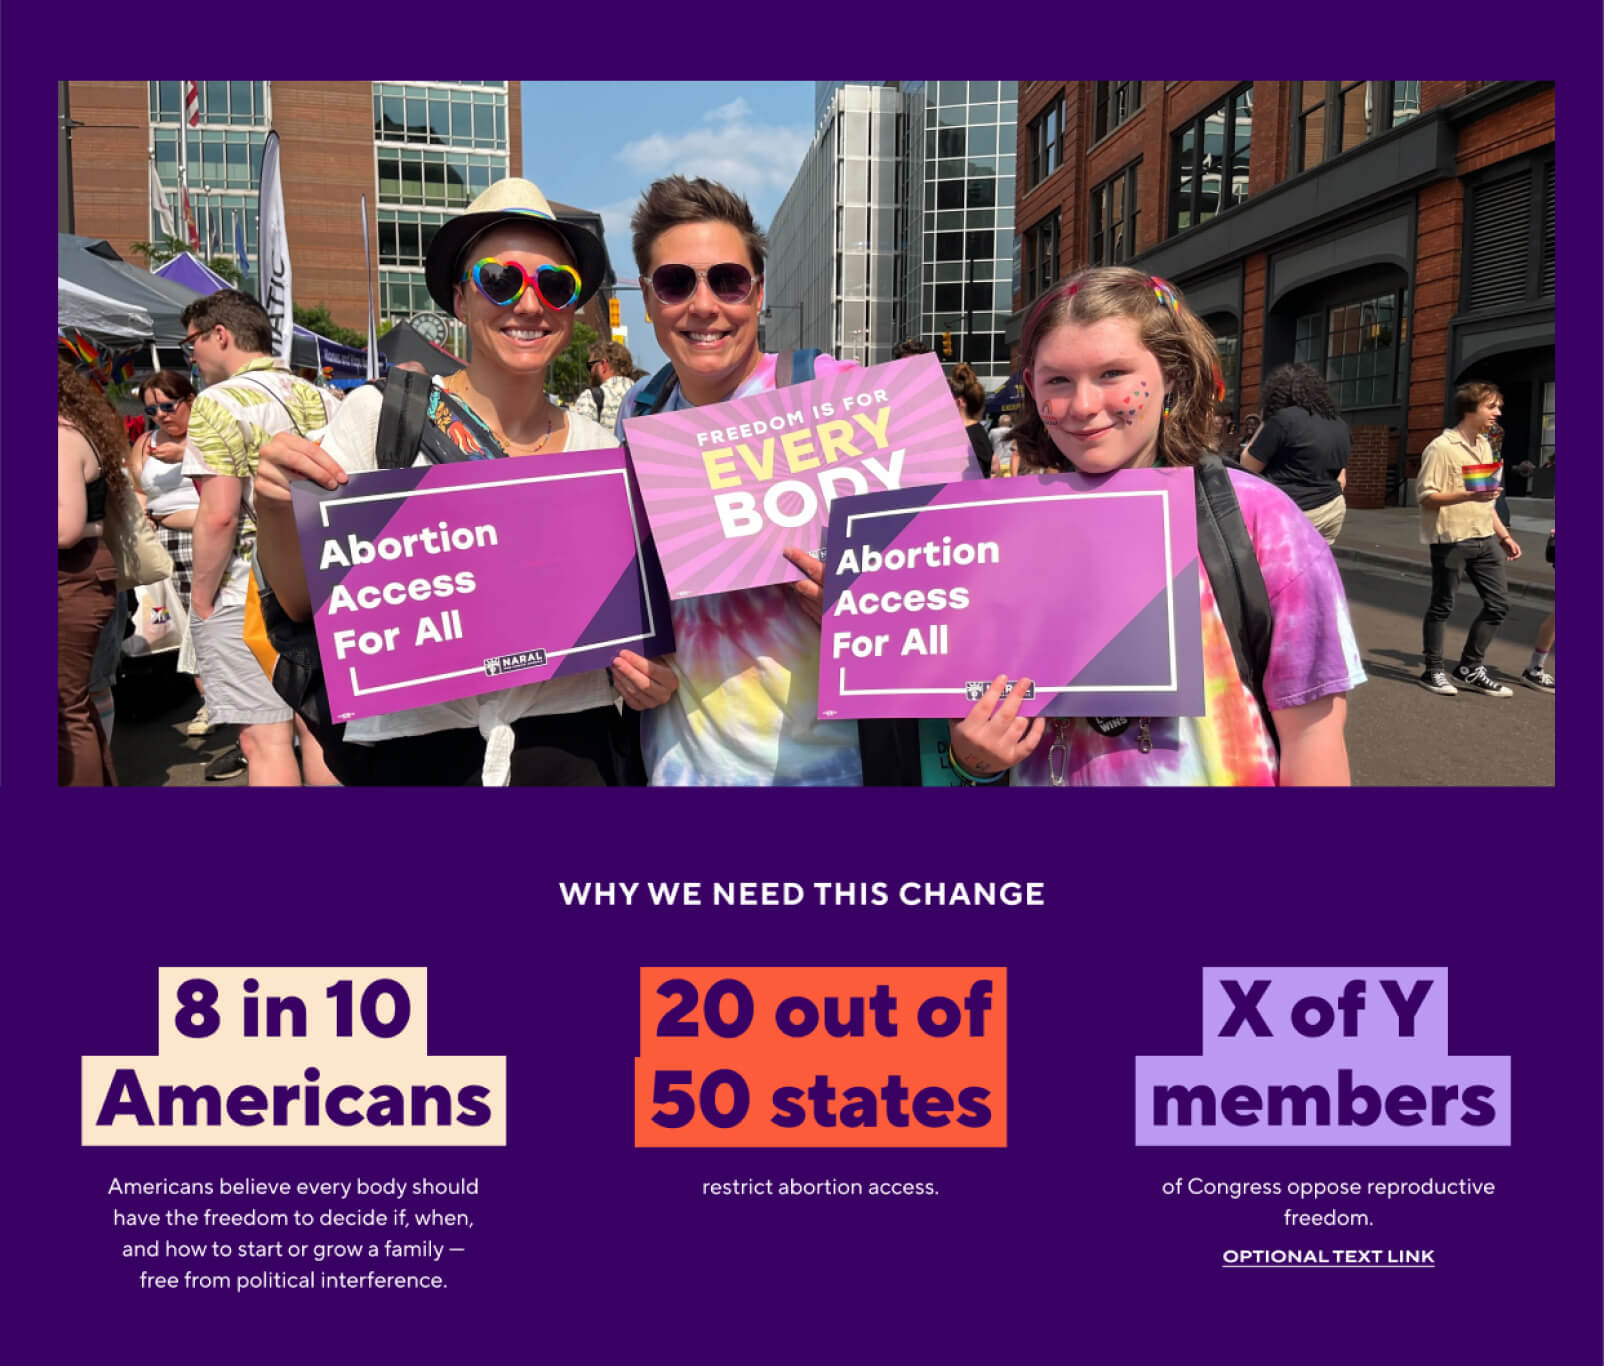 A photo of 3 people holding pro-choice rally signs, over 3 statistics about reproductive freedom.